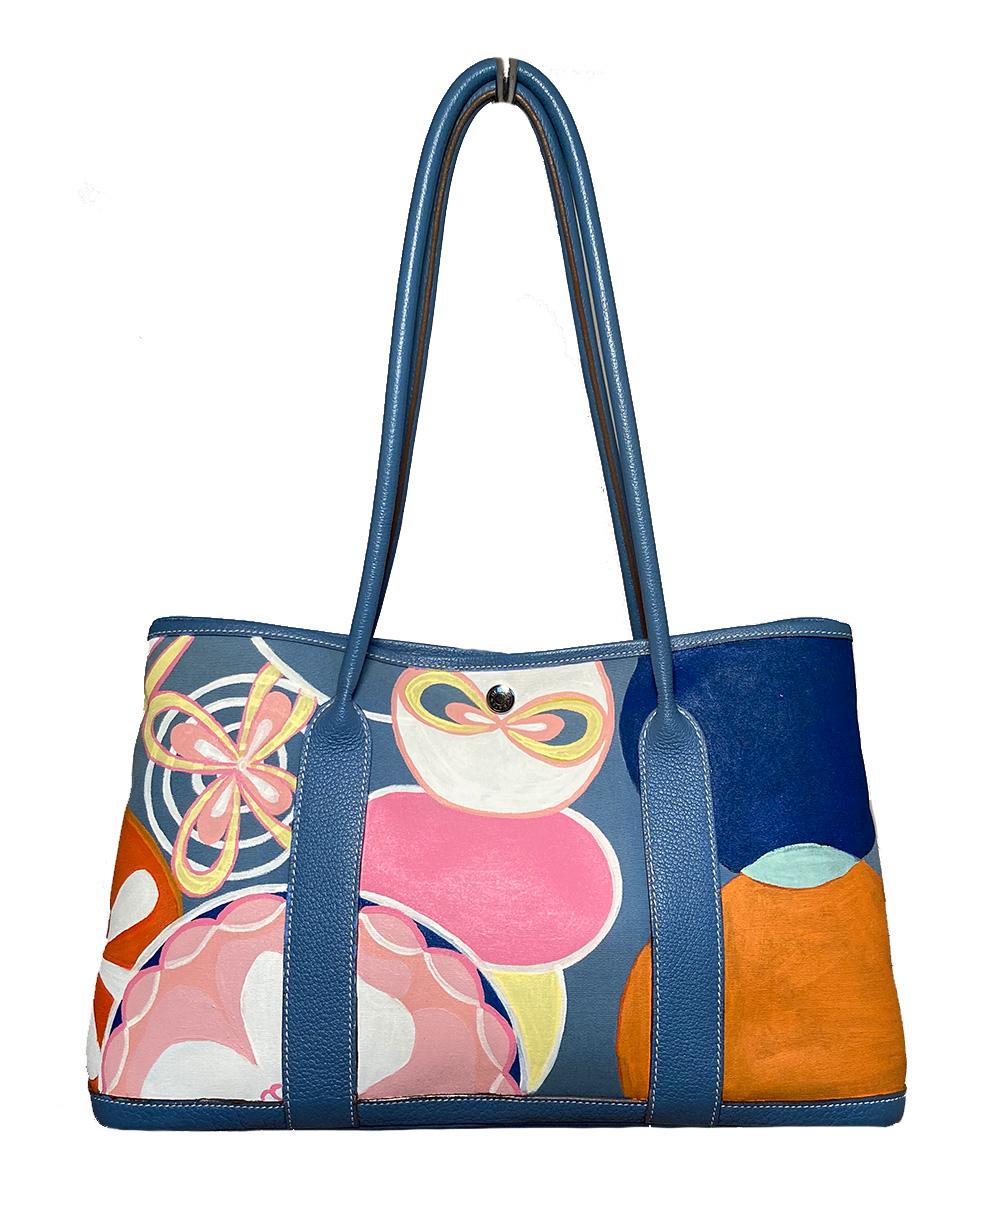 Hermes Blue Garden Party 40 Hand Painted in very good condition.  Hand painted blue canvas exterior trimmed with blue clemence leather and silver hardware. Two top leather shoulder straps can be worn or carried to suit any style. Hand painted canvas